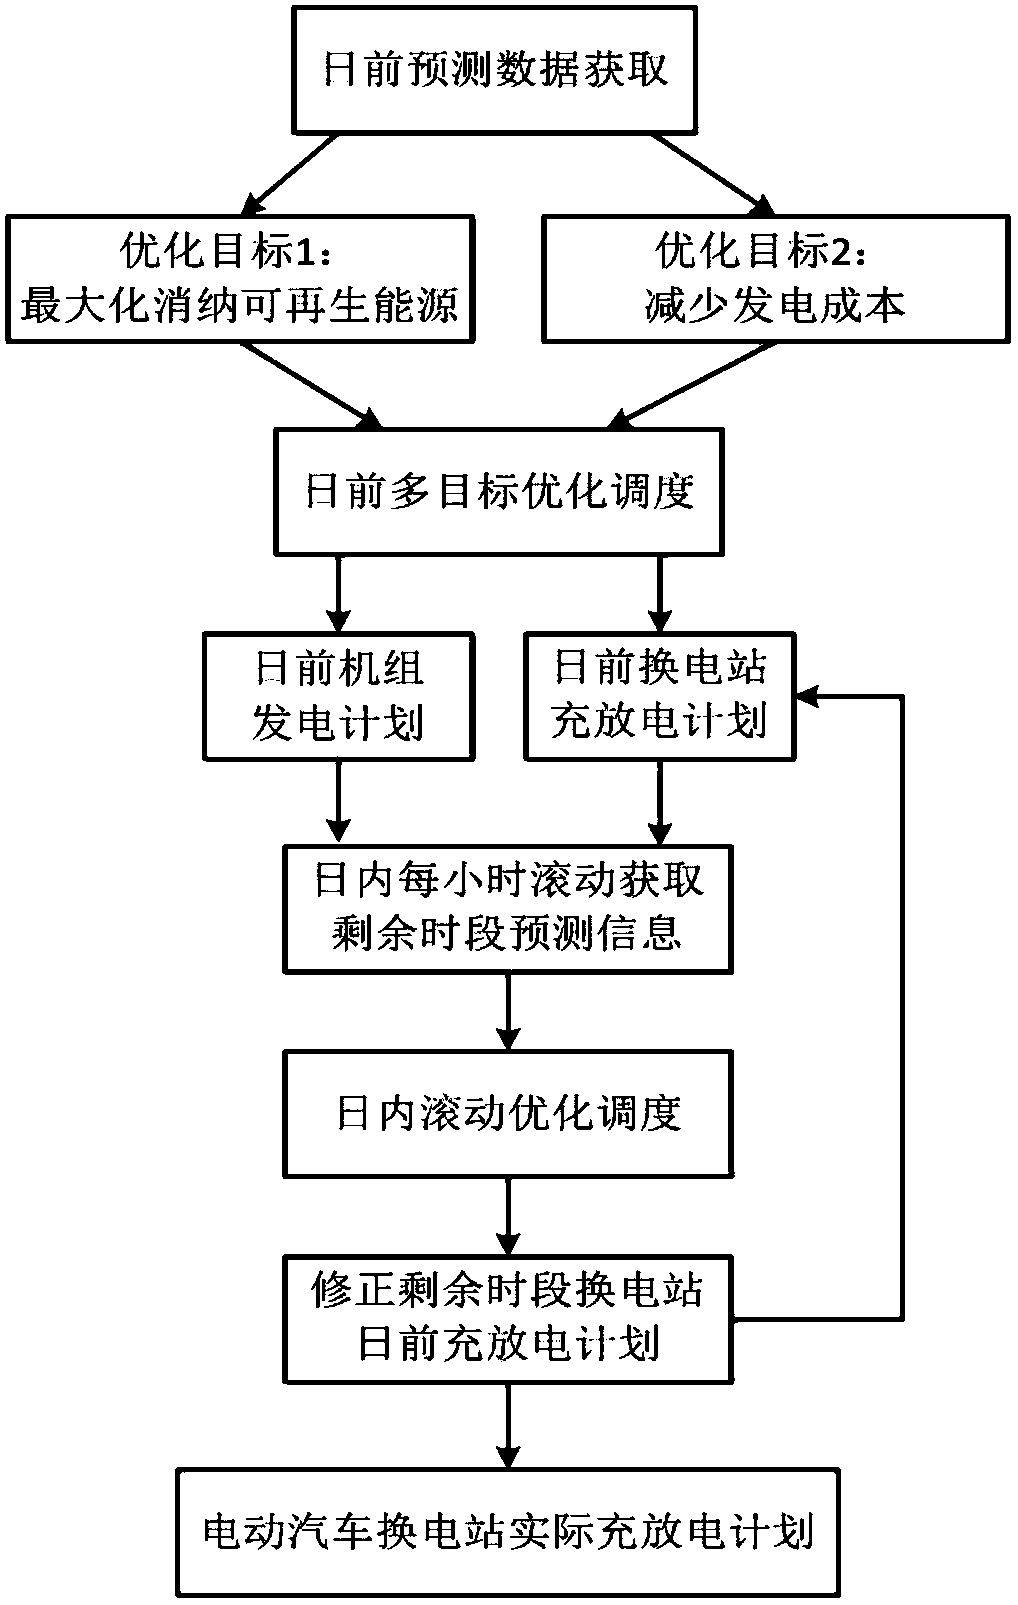 Charging and discharging scheduling method of electric vehicle swap station to promote the consumption of renewable energy